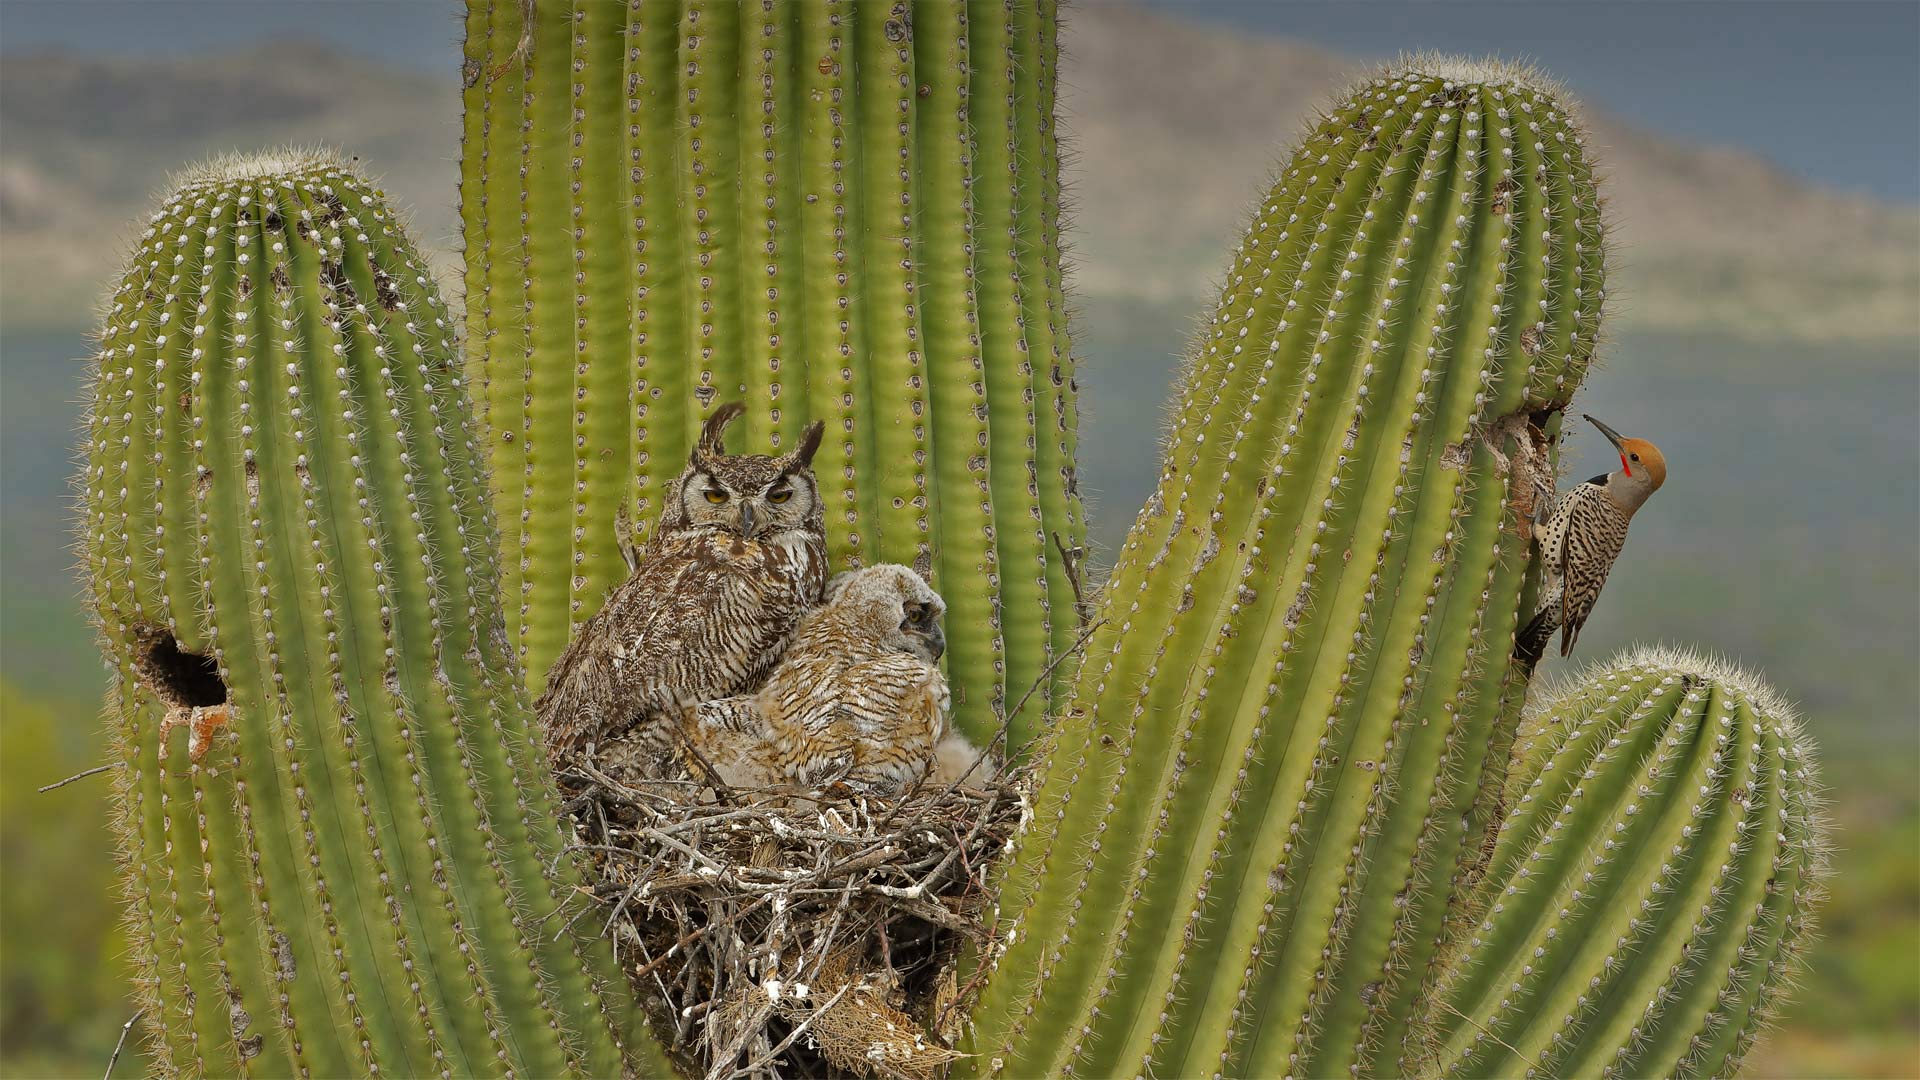 Great horned owls and a gilded flicker on a saguaro cactus in the Sonoran Desert, Arizona - John Cancalosi